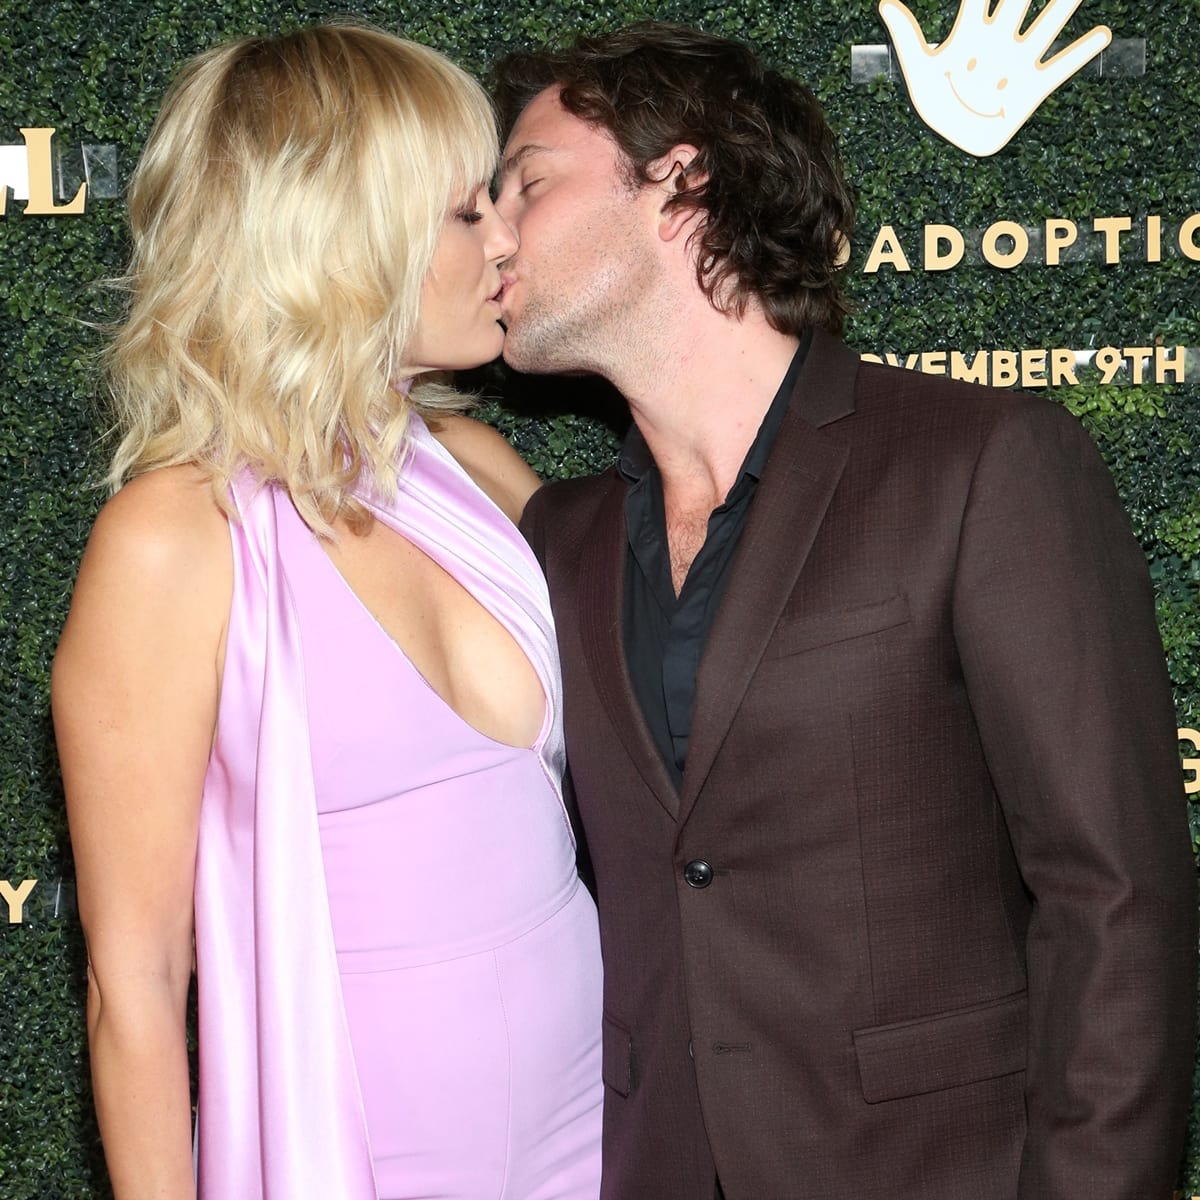 Malin Akerman met her younger husband Jack Donnelly through her younger sister's boyfriend